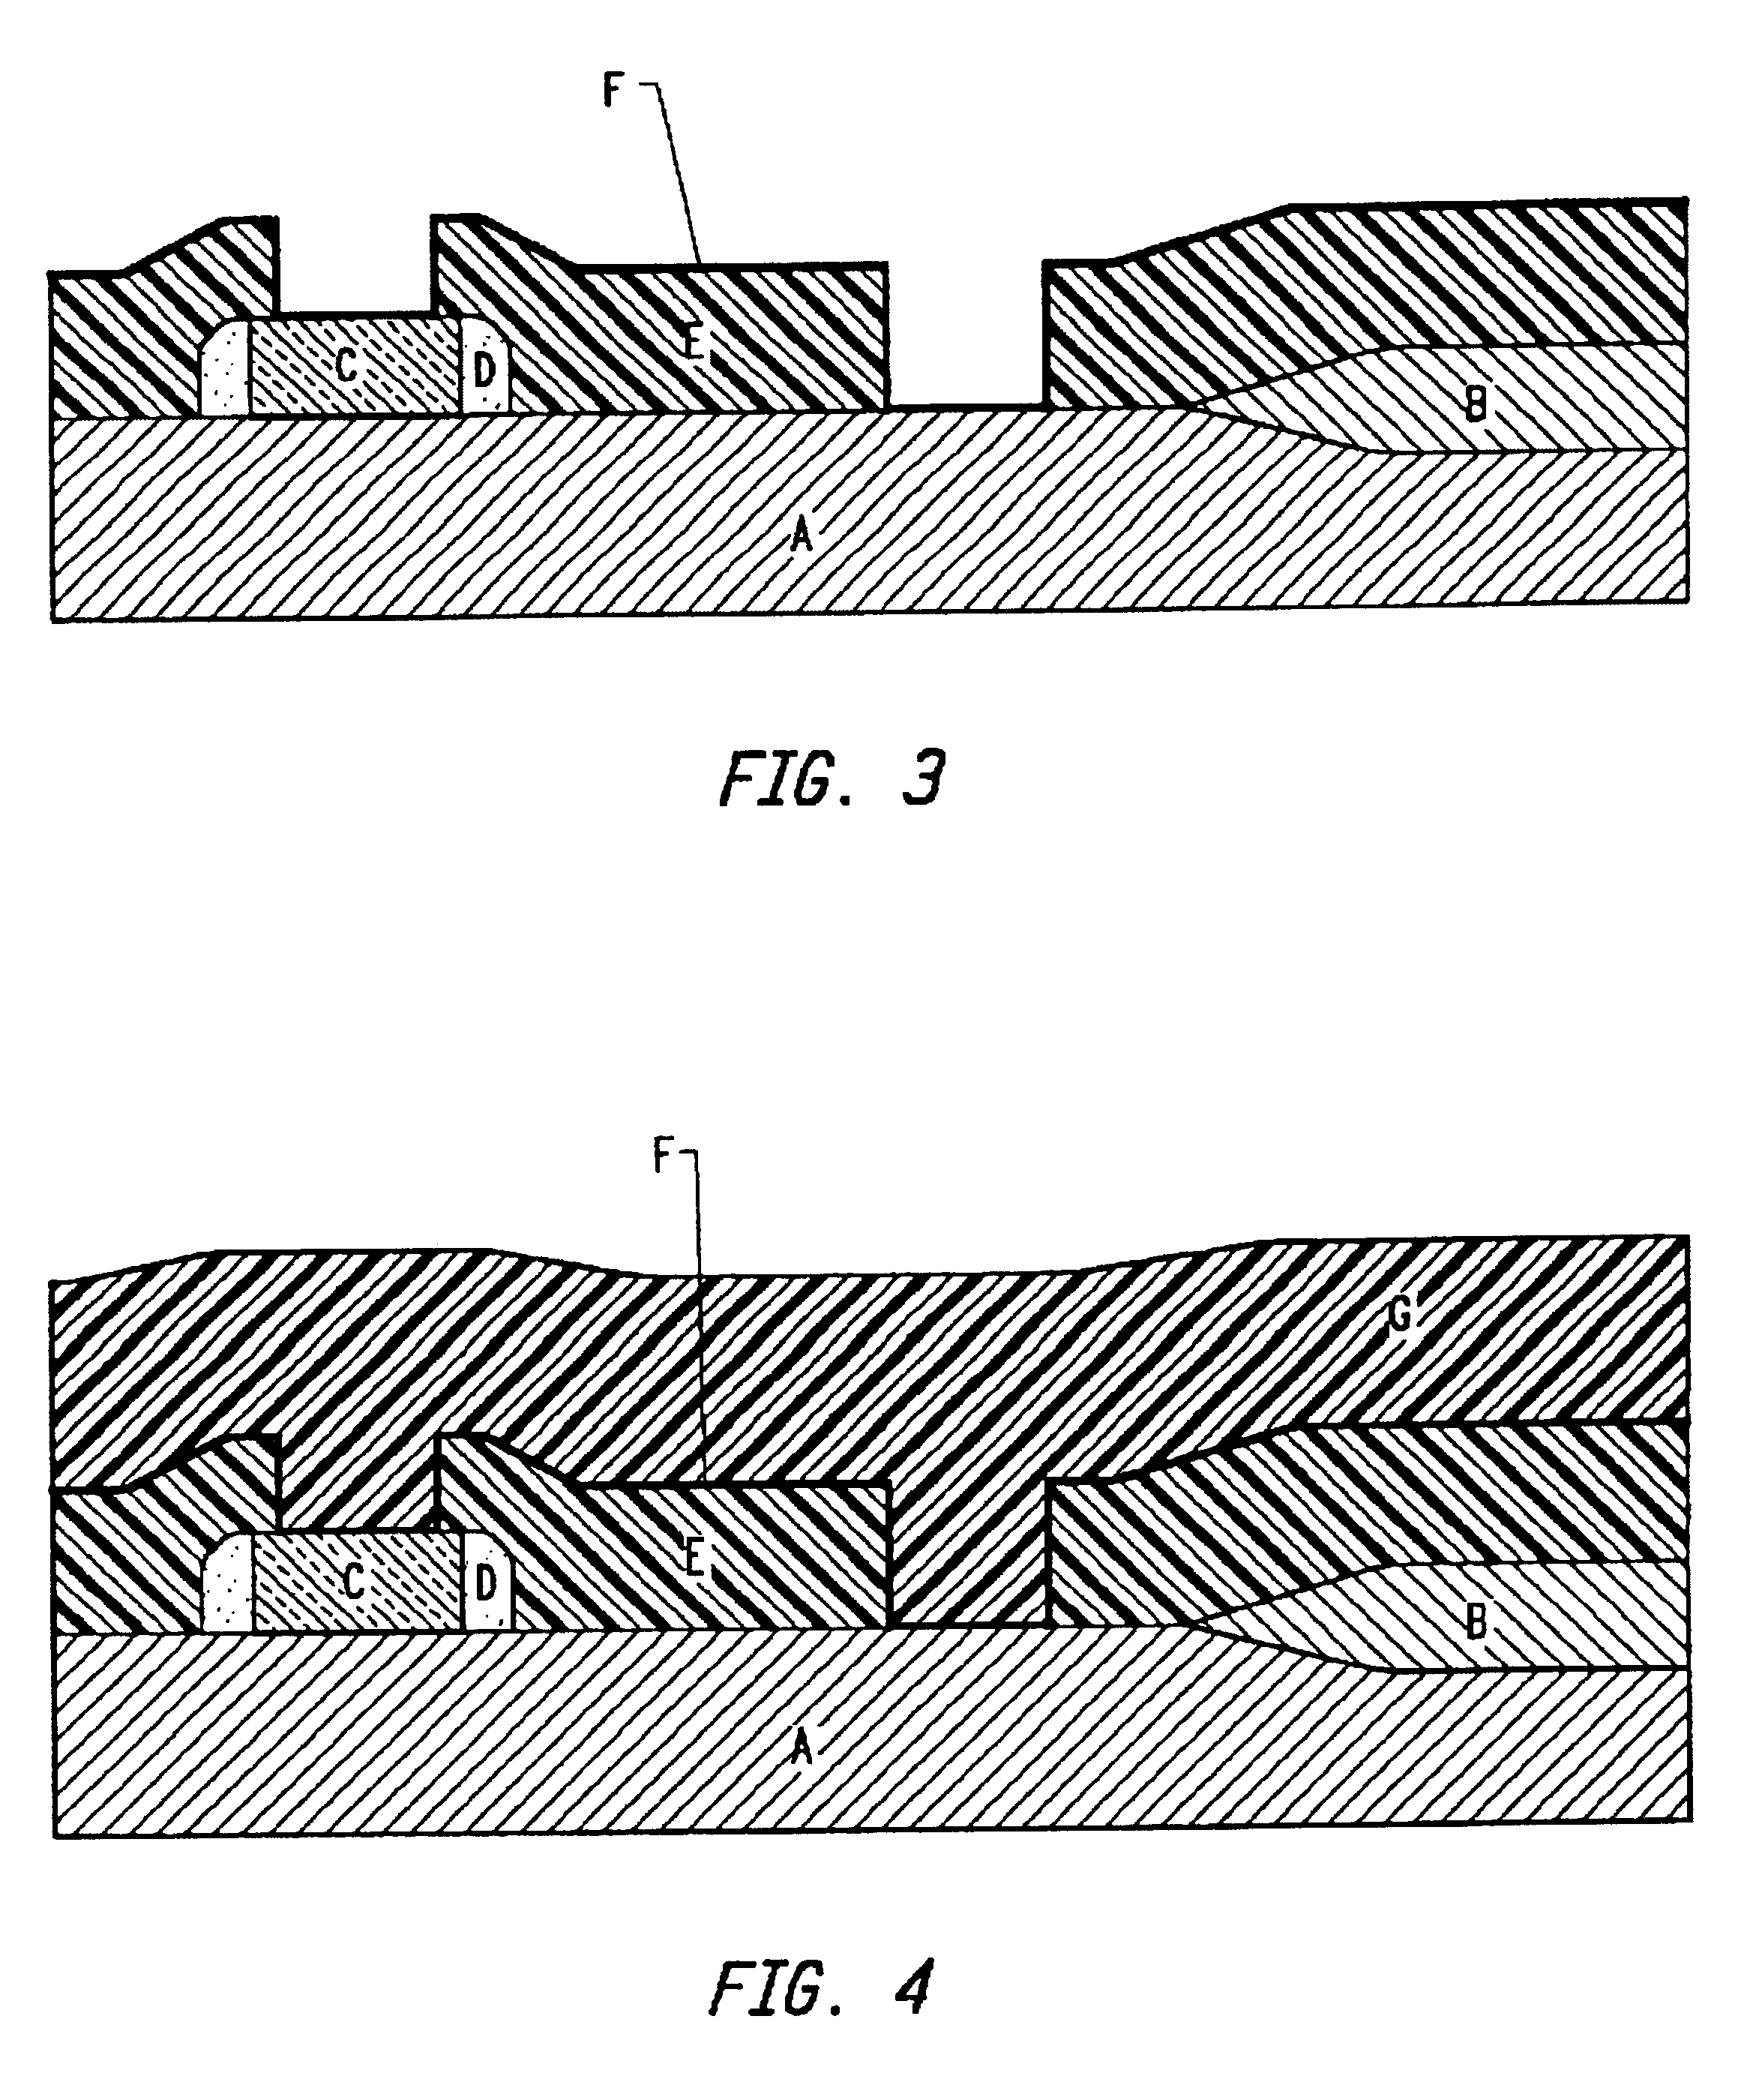 Electrodeposition apparatus with virtual anode